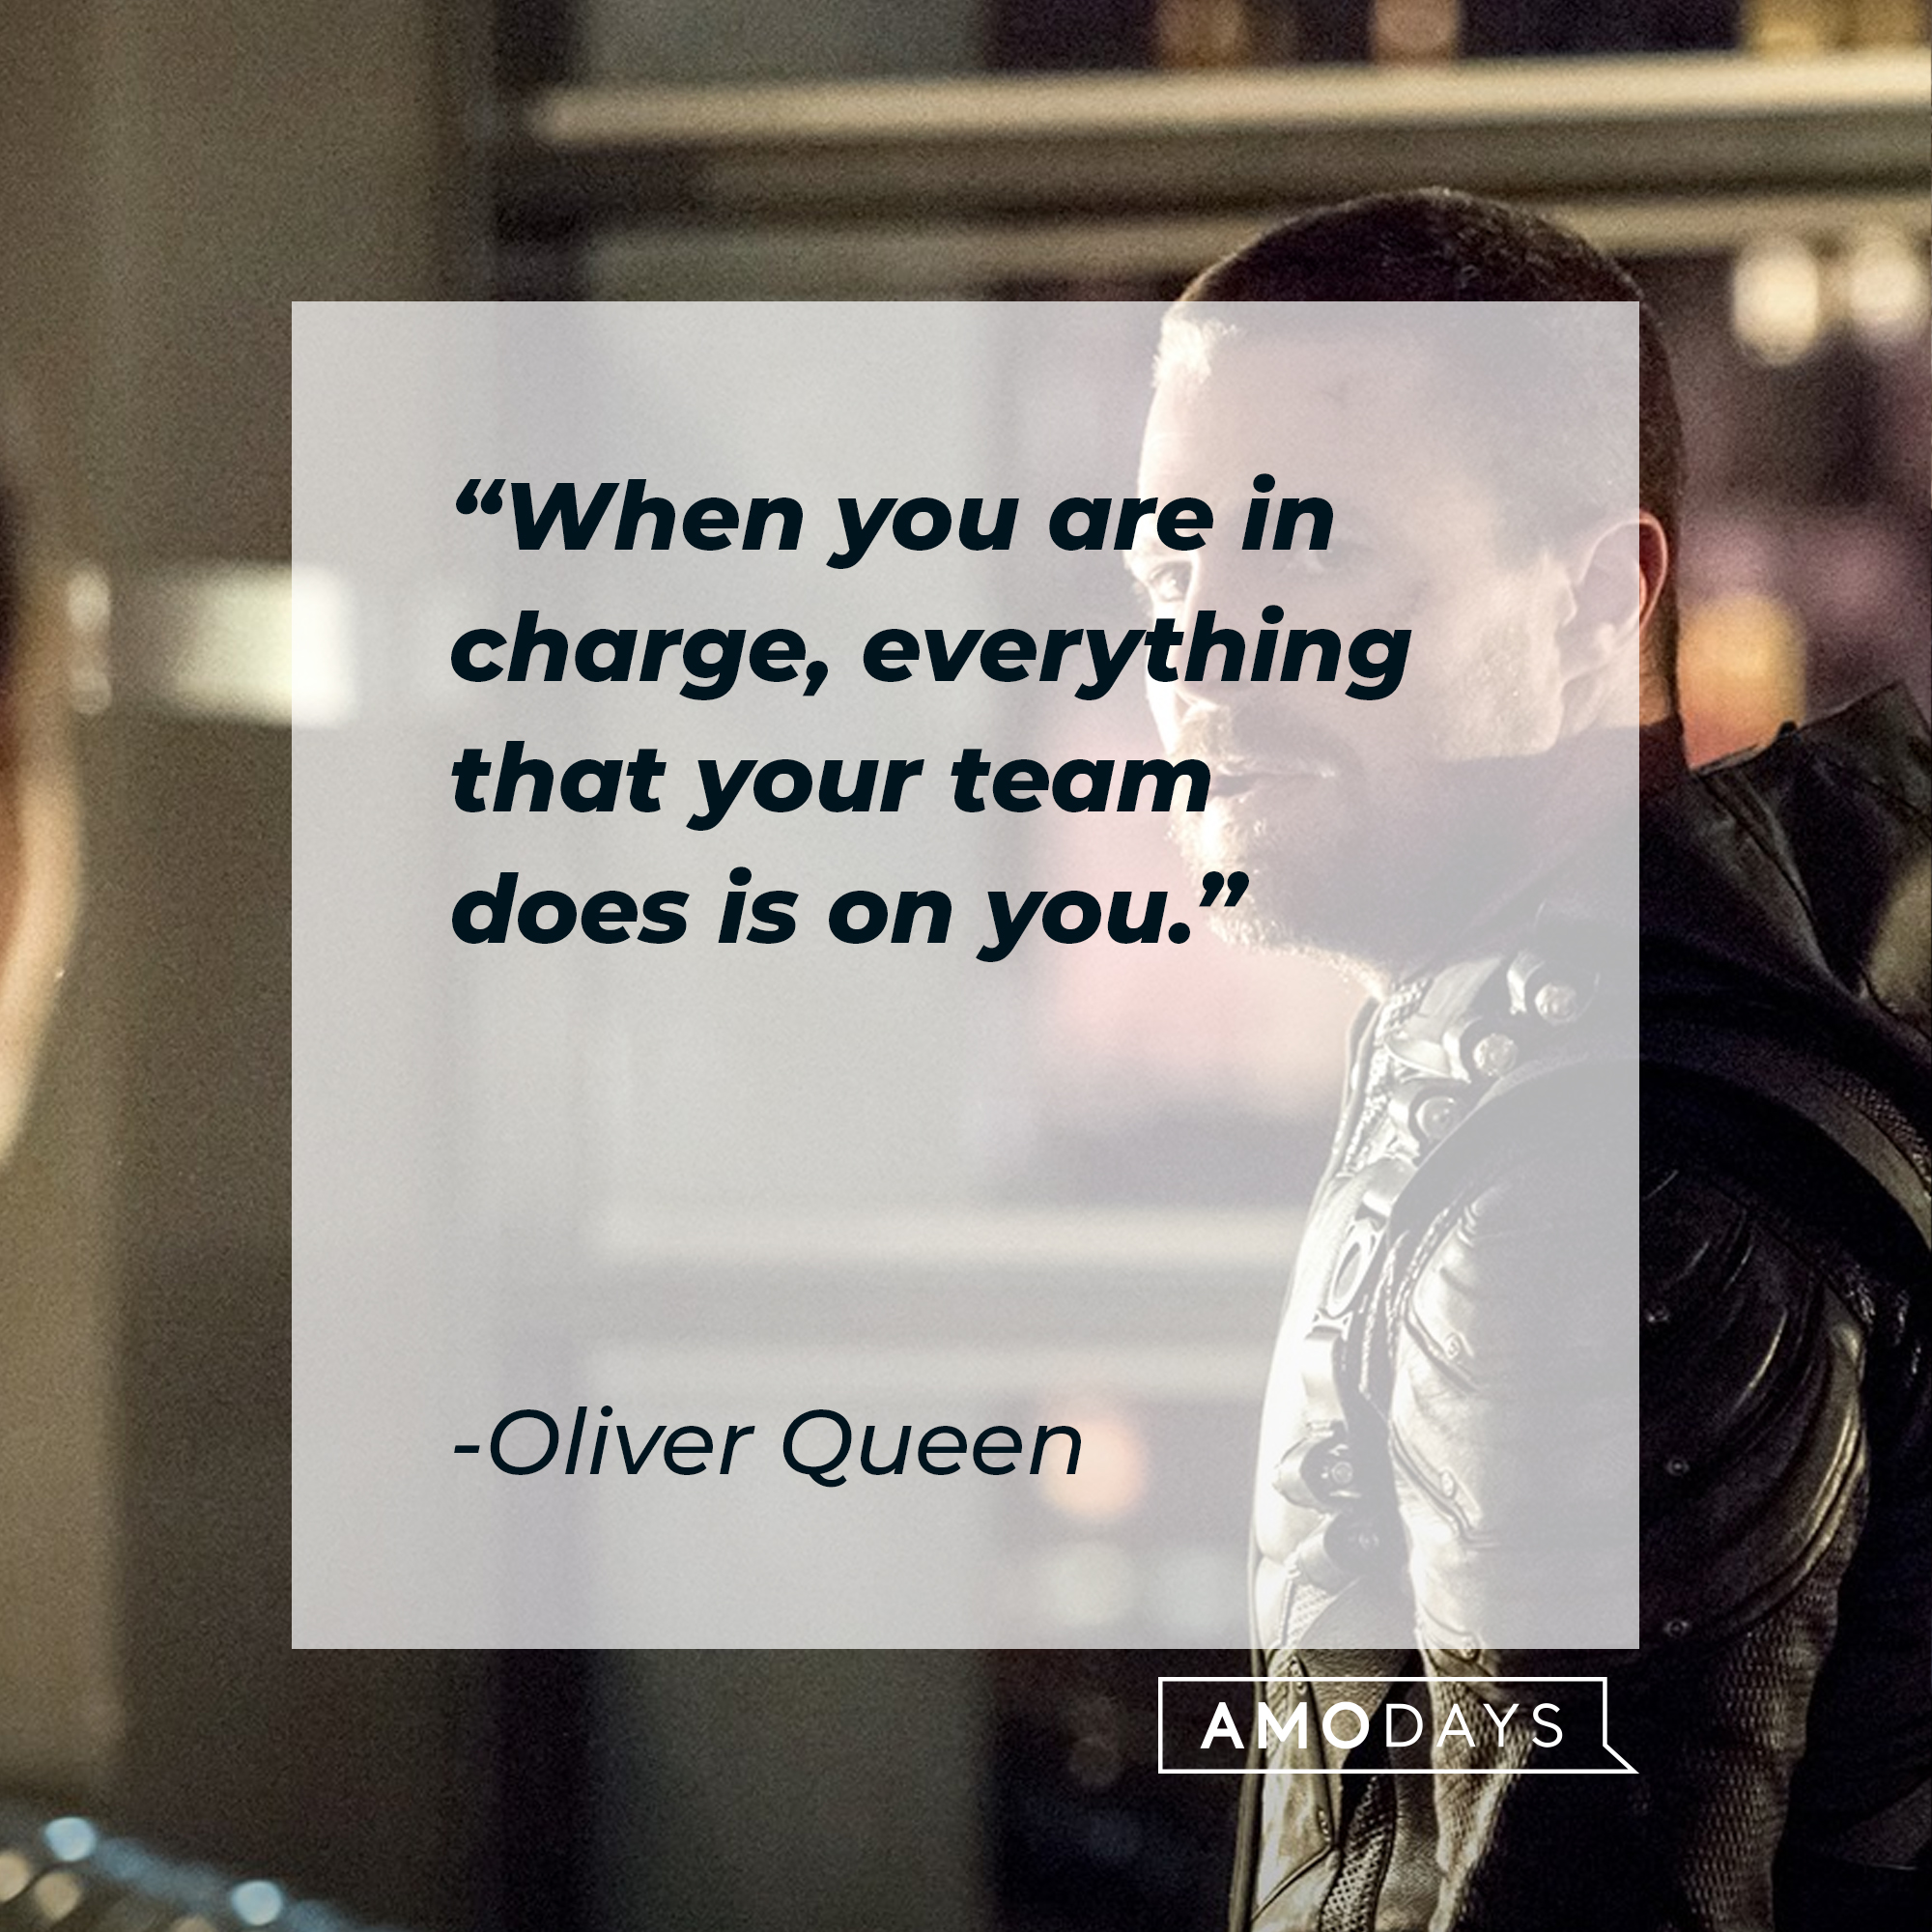 An image of Oliver Queen with his quote: “When you are in charge, everything that your team does is on you.” | Source: facebook.com/CWArrow